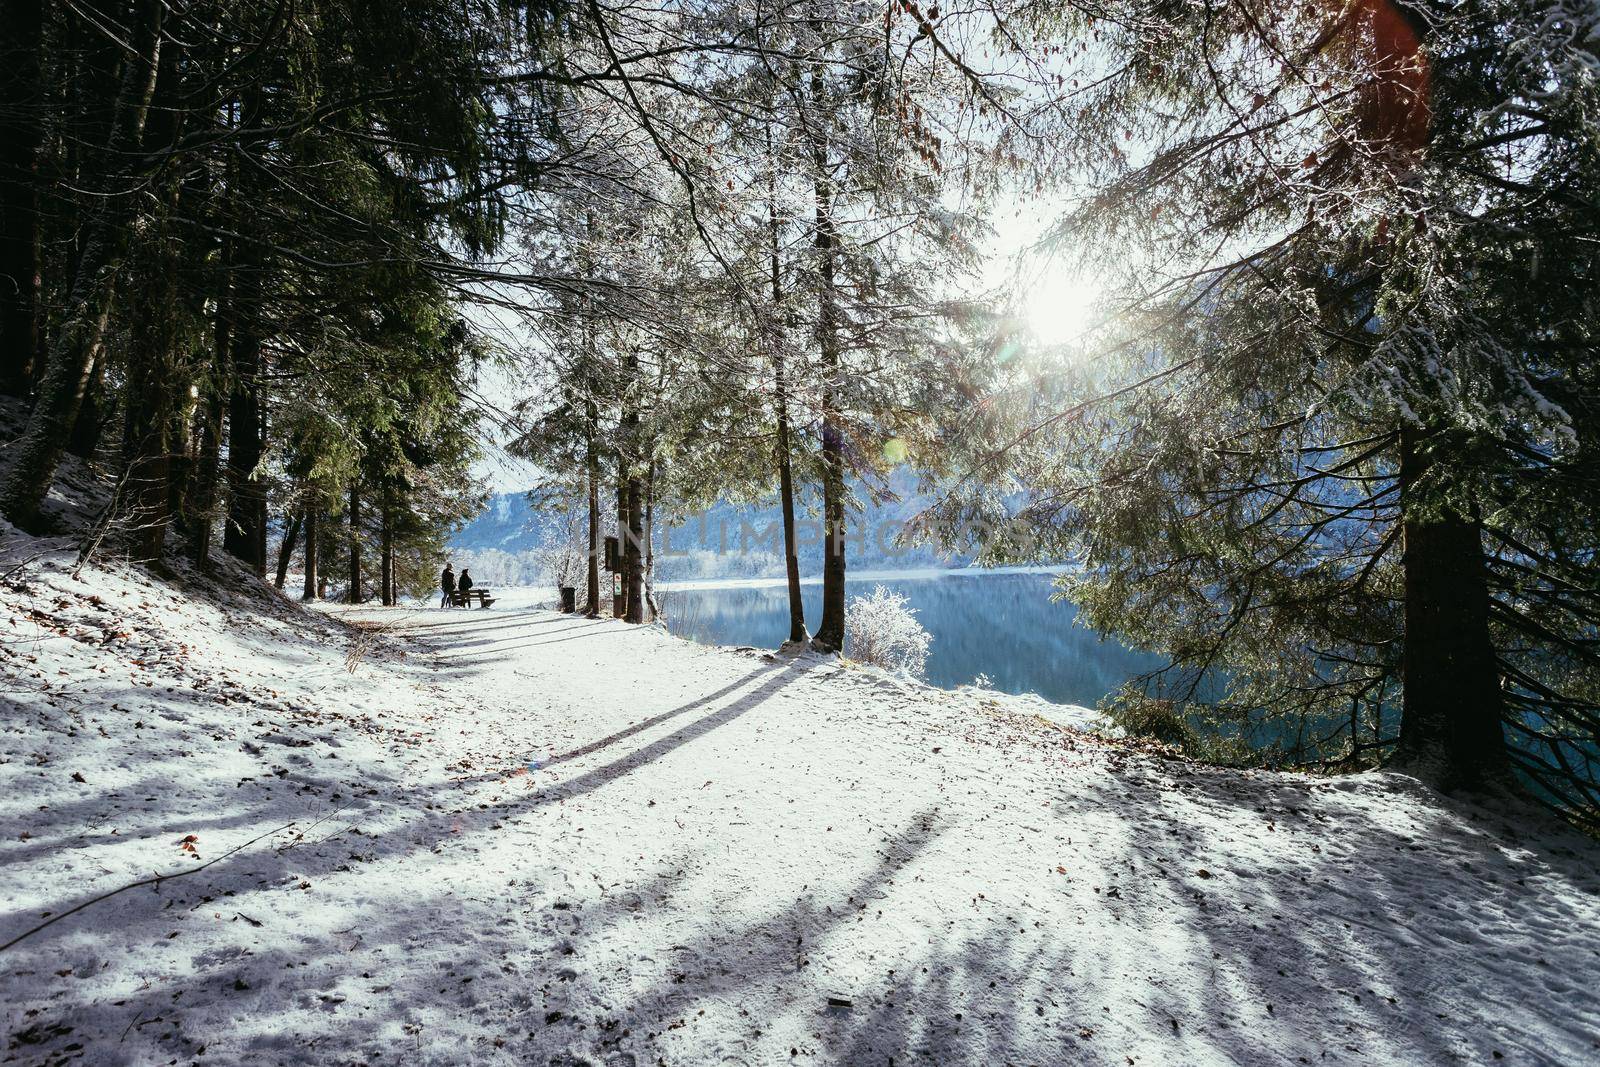 Winter landscape with footpath, snowy trees and blue sky